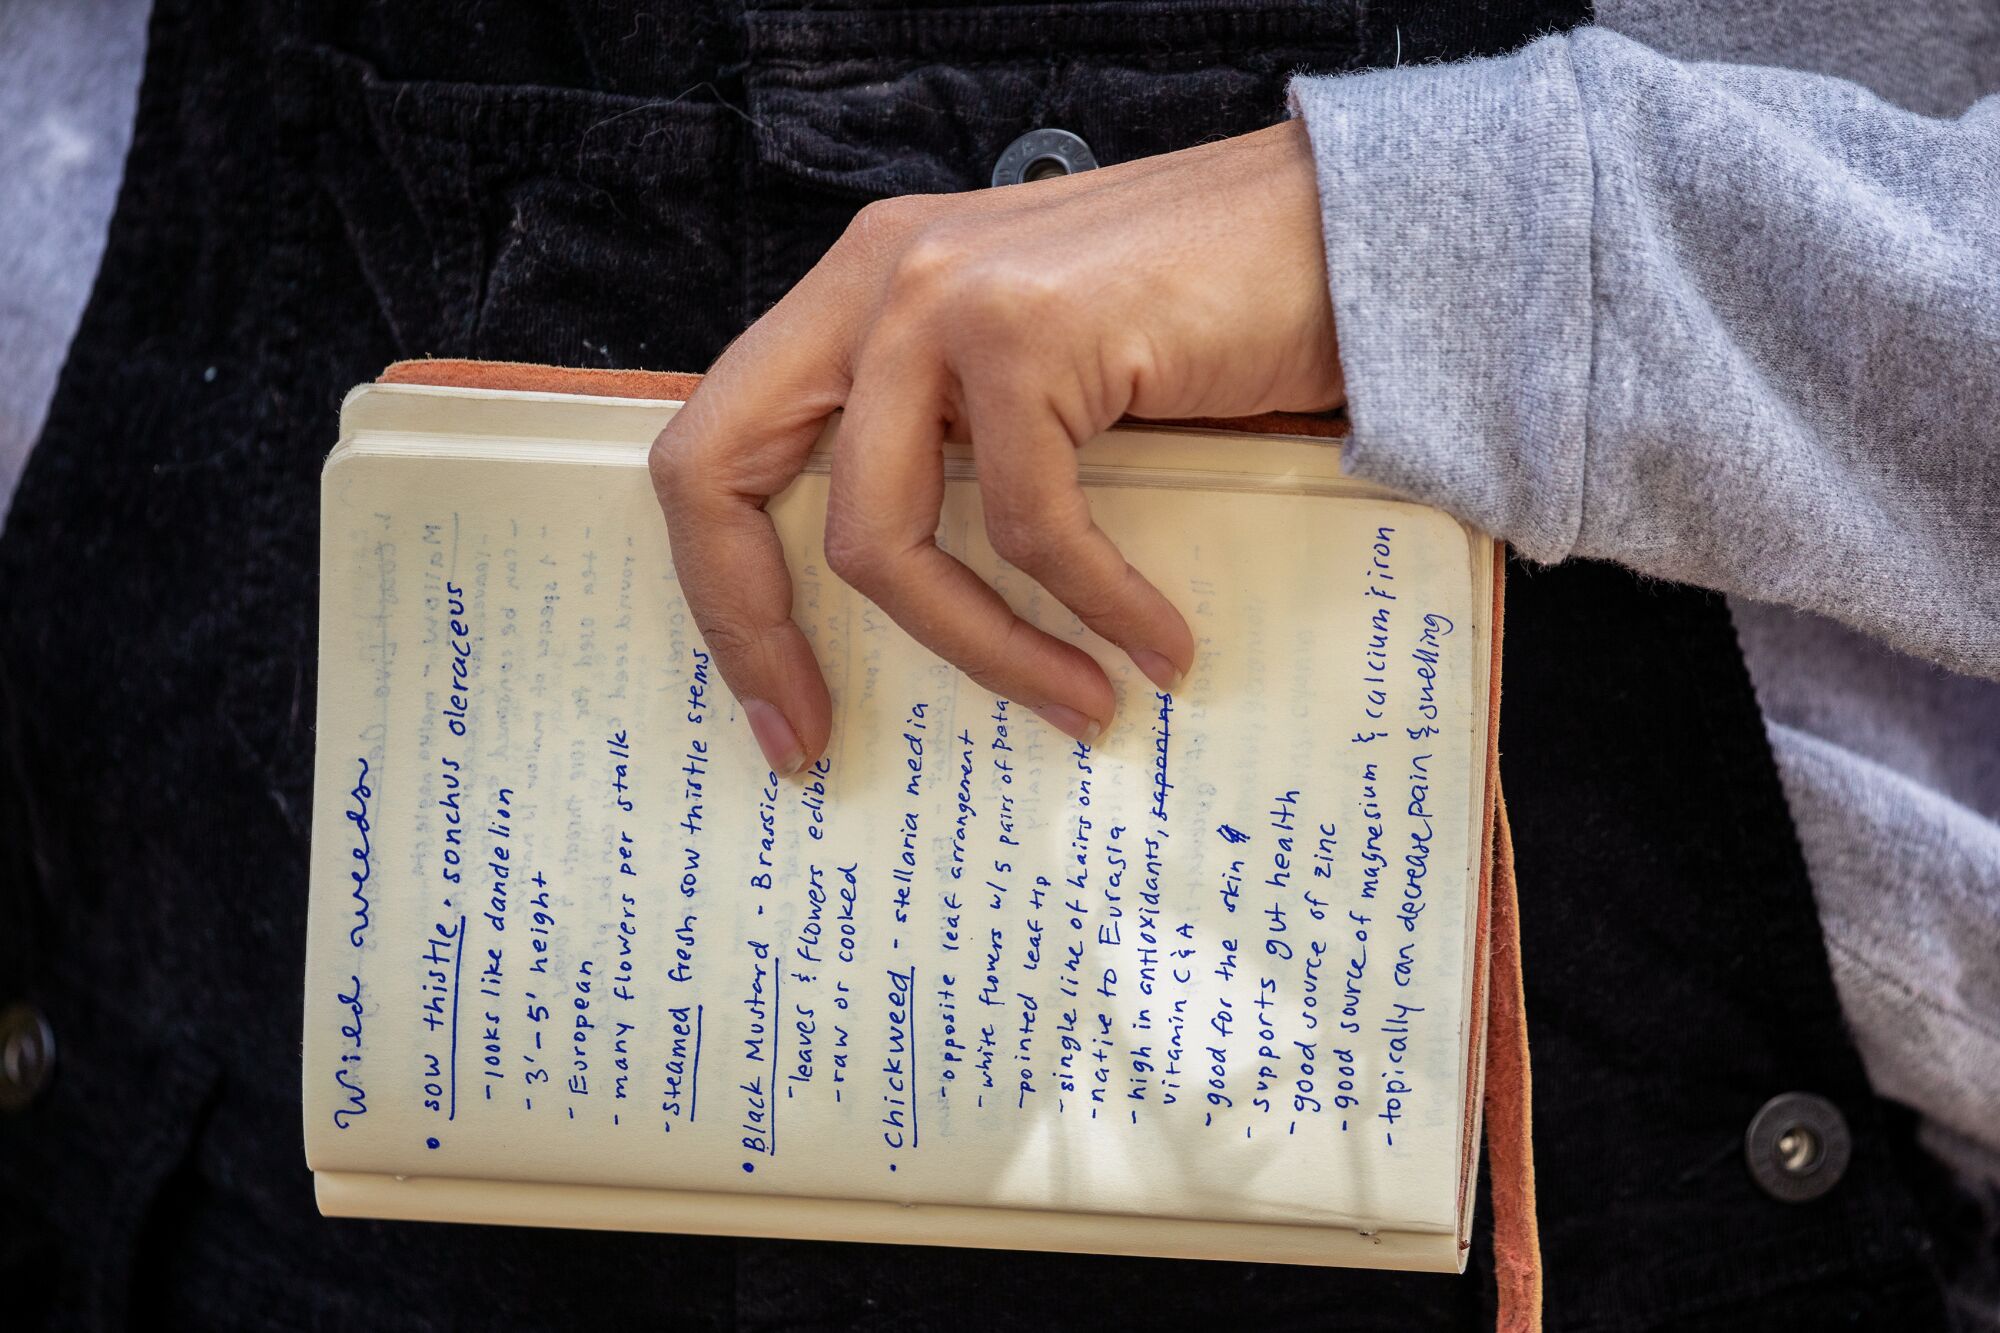 A close up of a hand clutching a journal with handwritten notes in it.